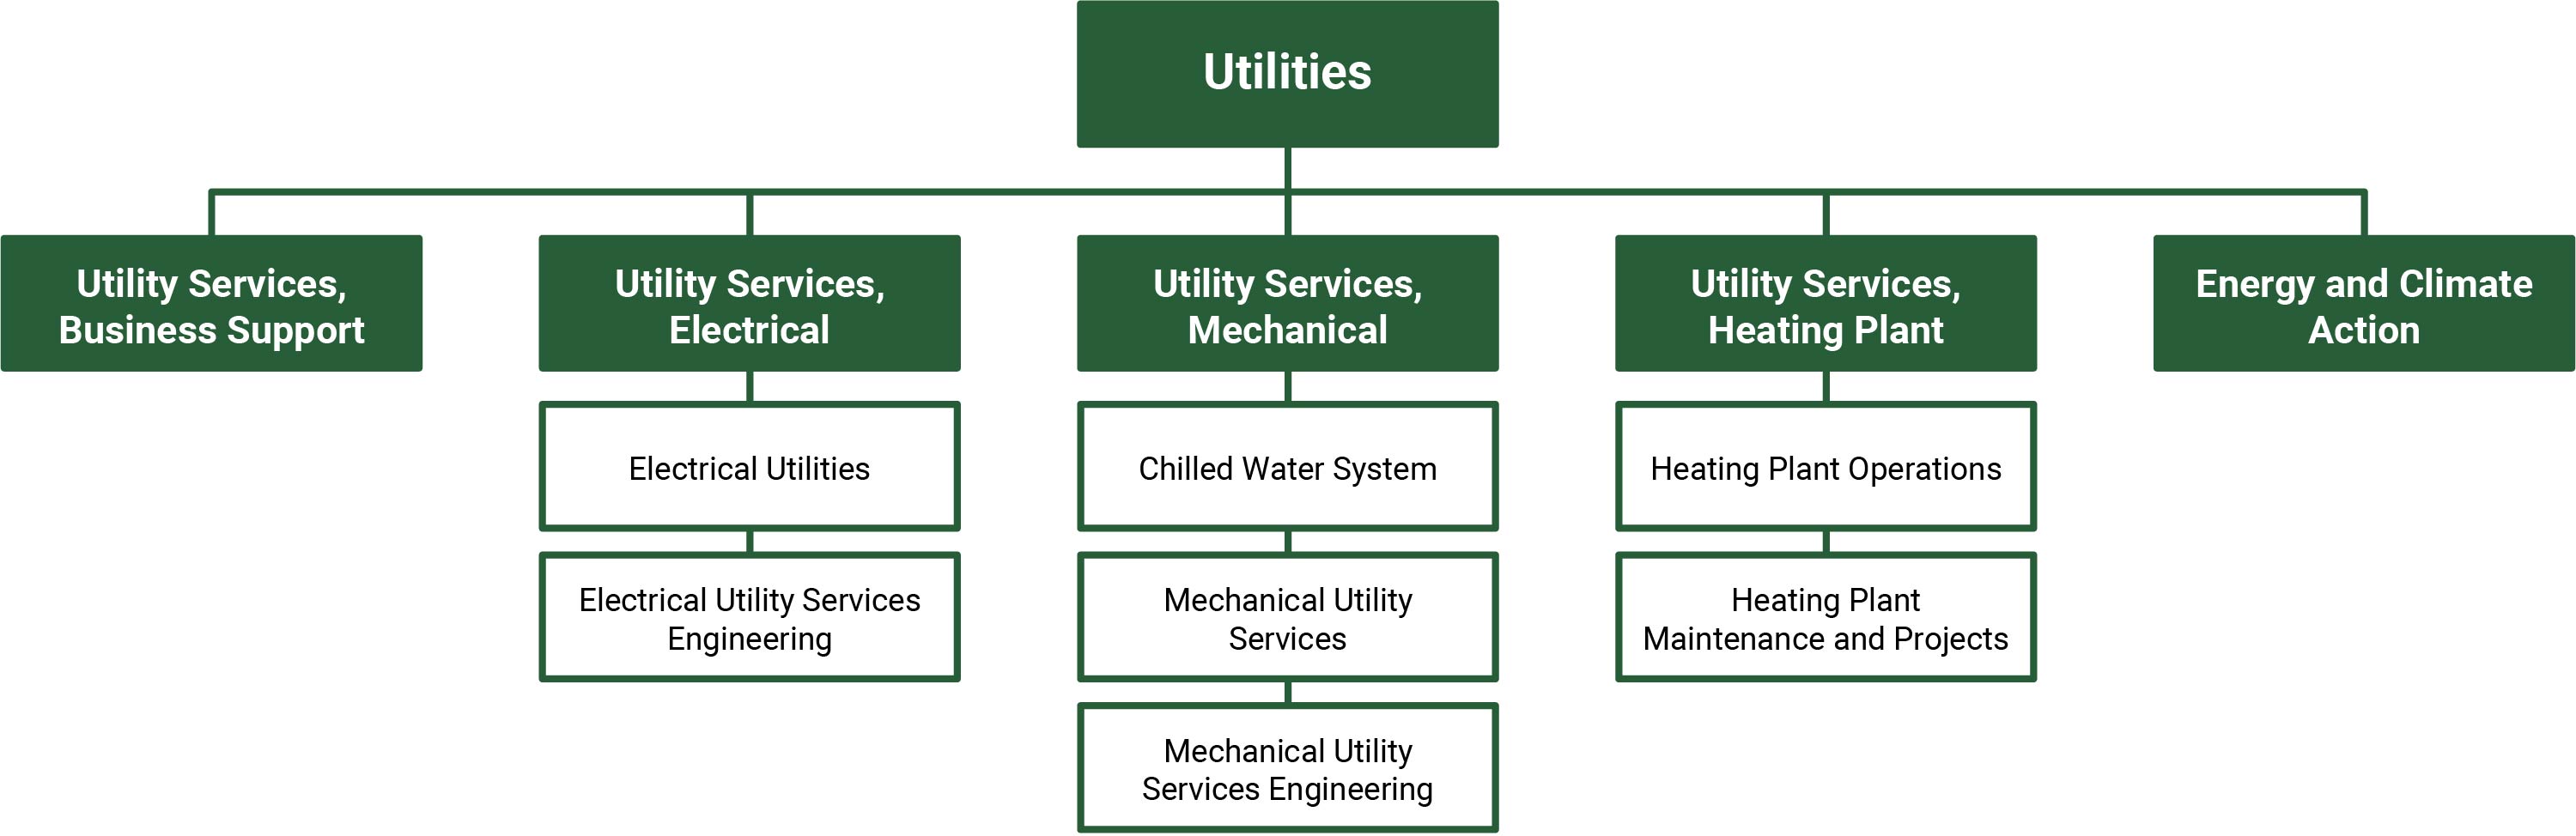 Organizational chart representing the Utilities unit within the Vice-President Facilities & Operations portfolio